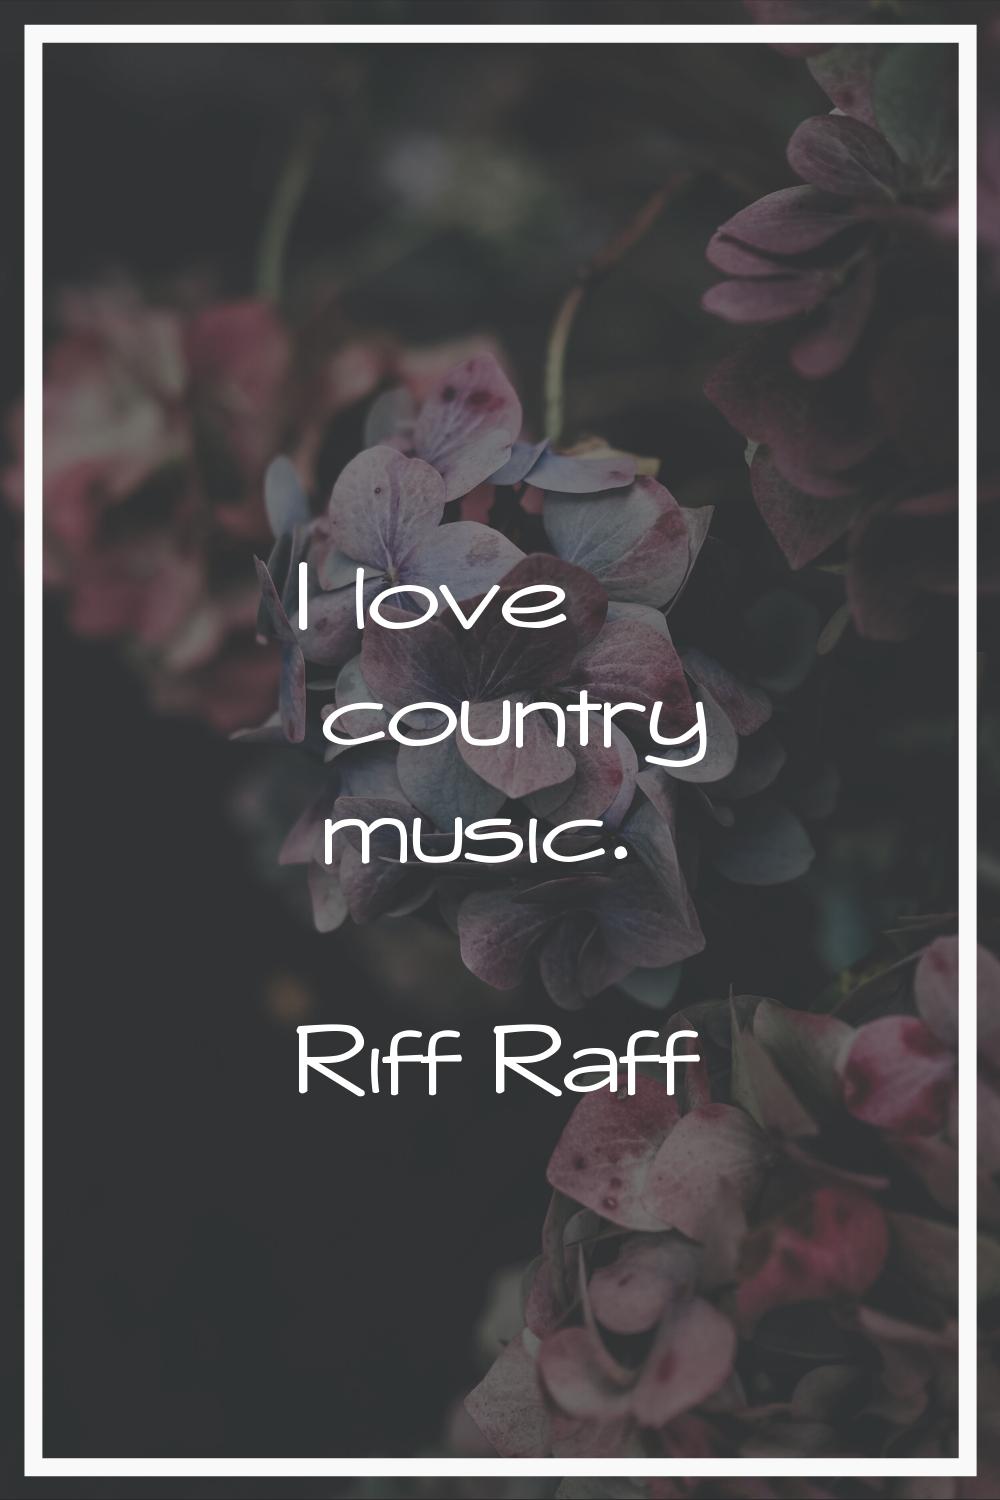 I love country music.